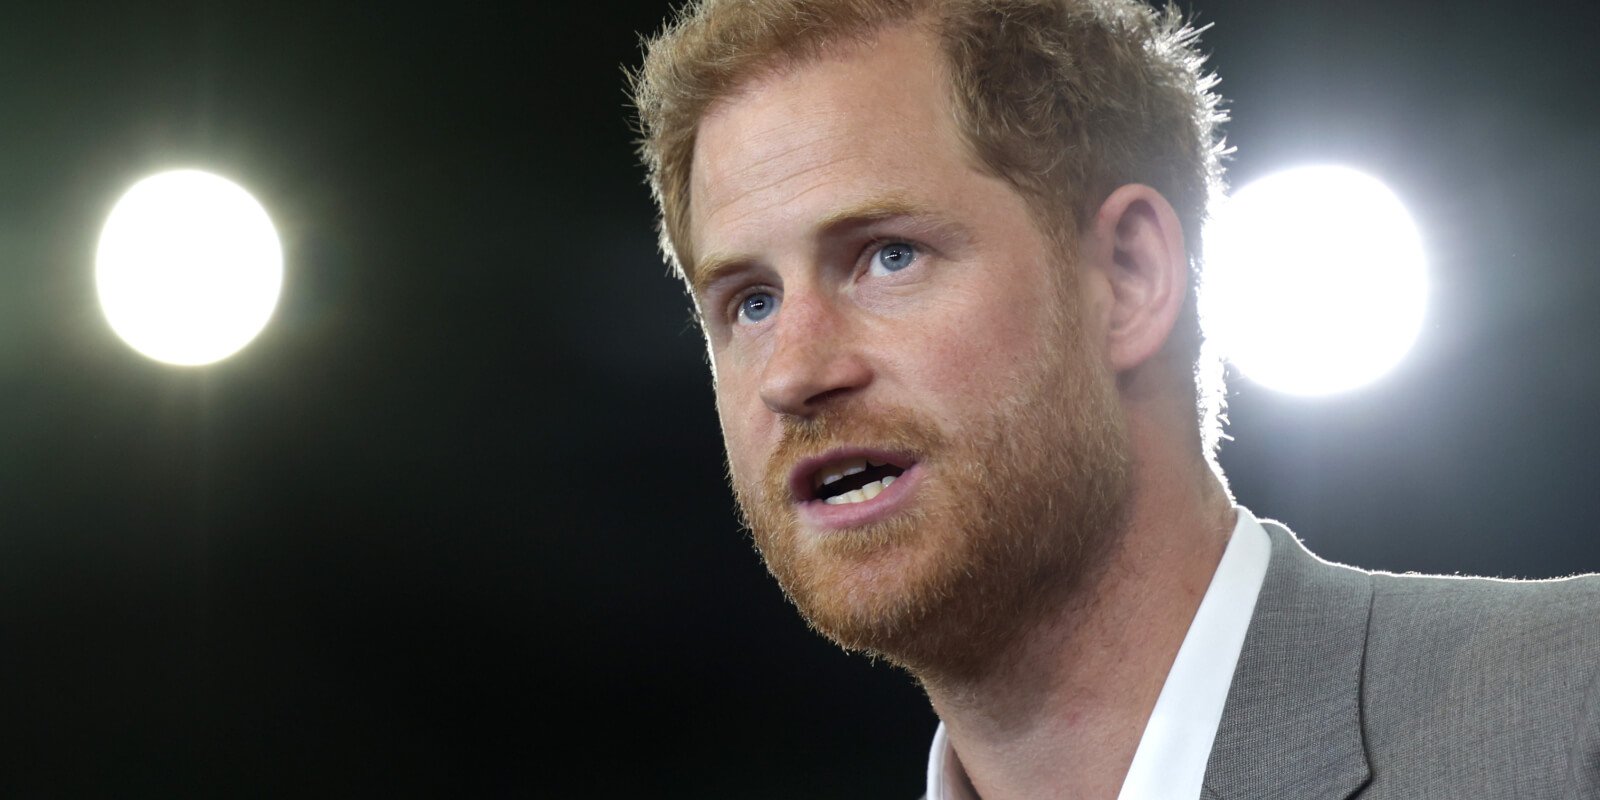 Prince Harry at the Invictus Games Dusseldorf 2023 - One Year To Go events, on September 06, 2022 in Dusseldorf, Germany.